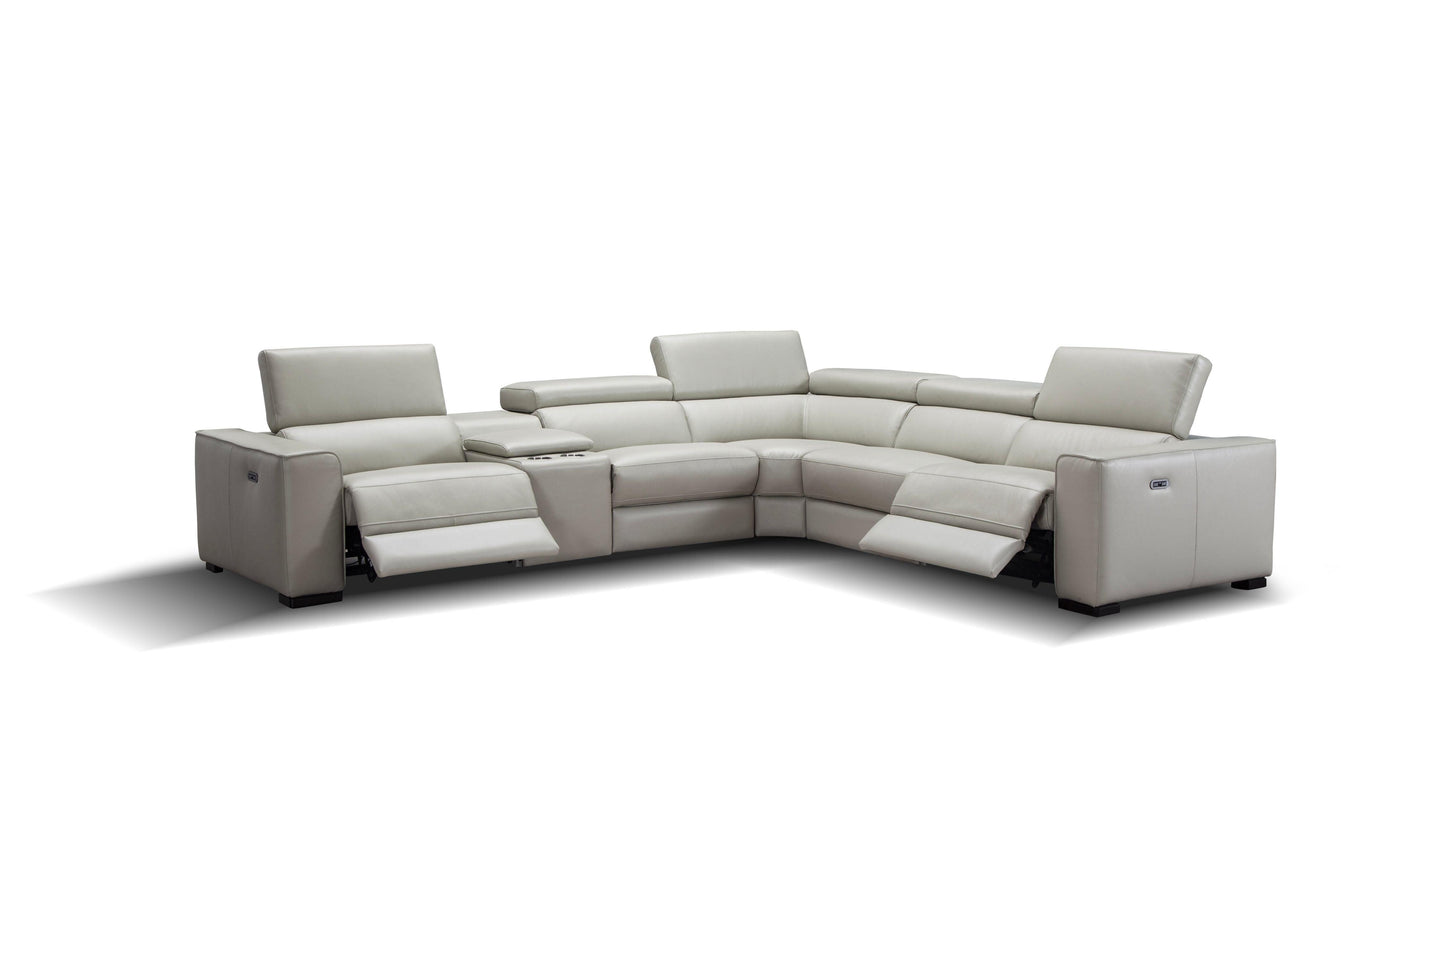 Picasso 6Pc Motion Sectional In Dark Grey - Venini Furniture 